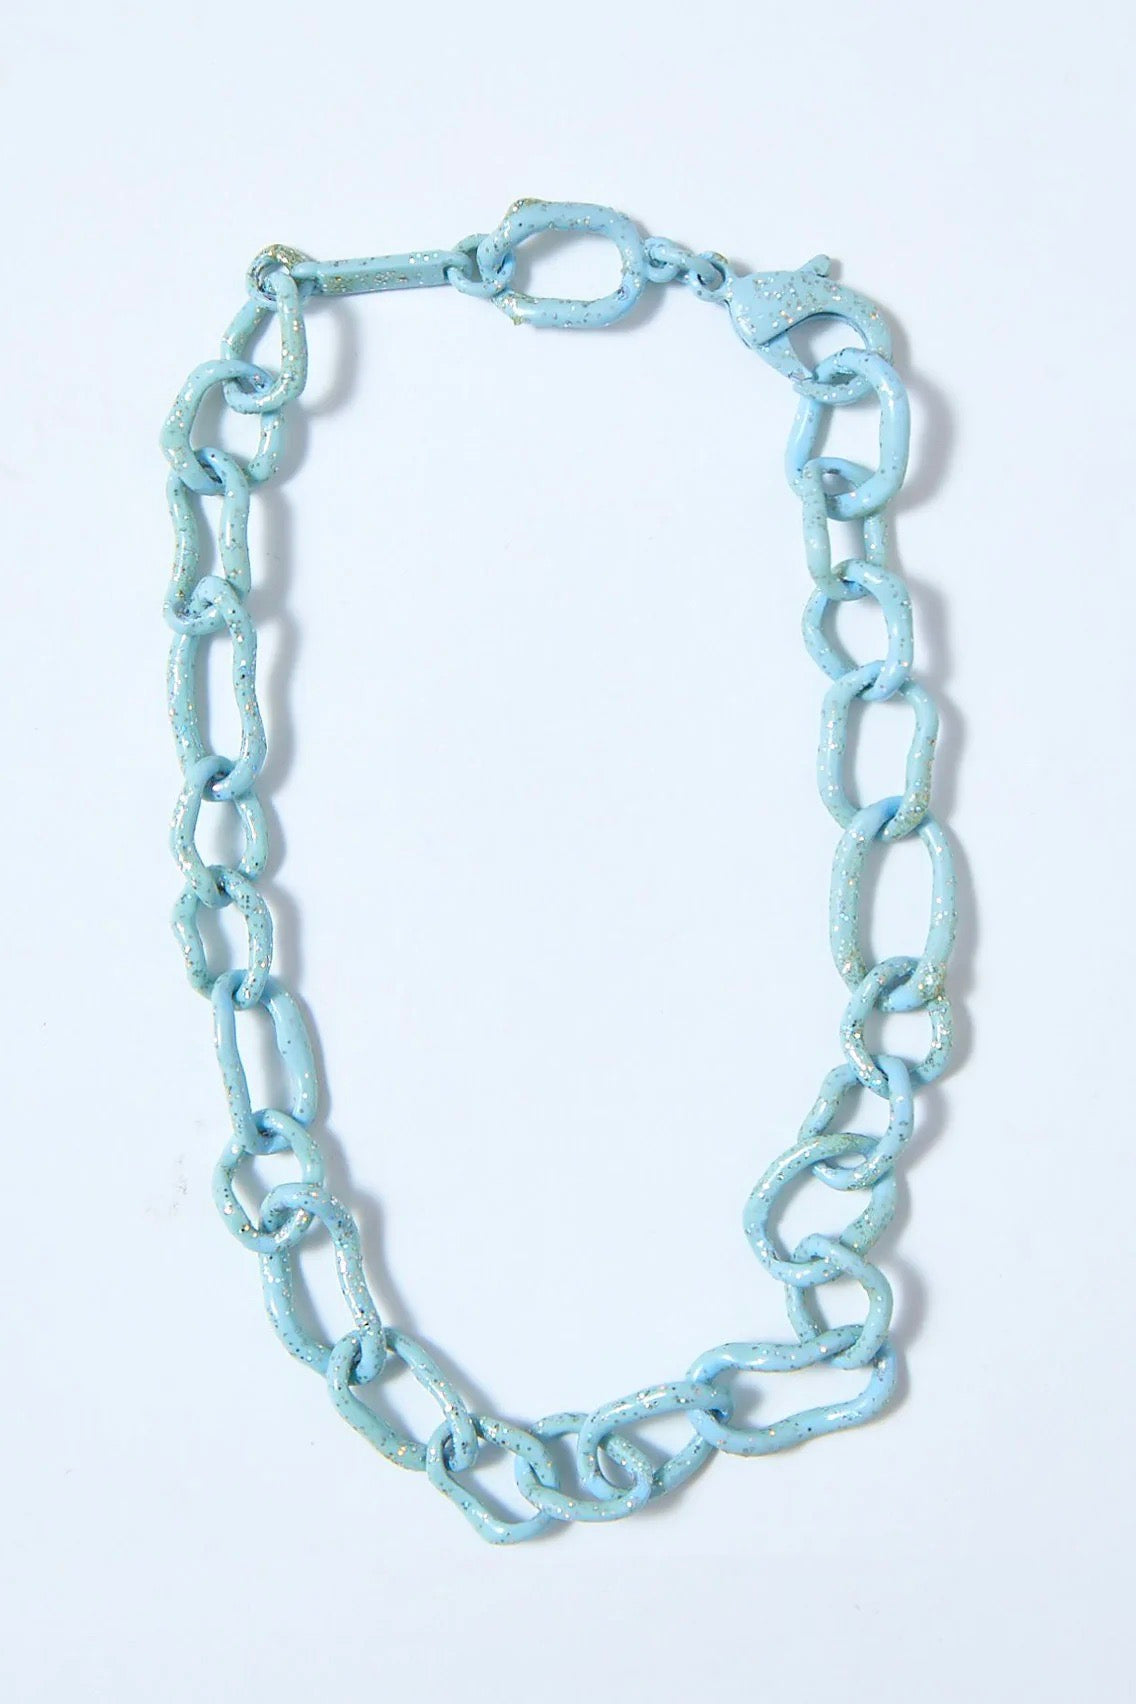 Collina Strada - Crushed Chain Necklace: Ice Caps